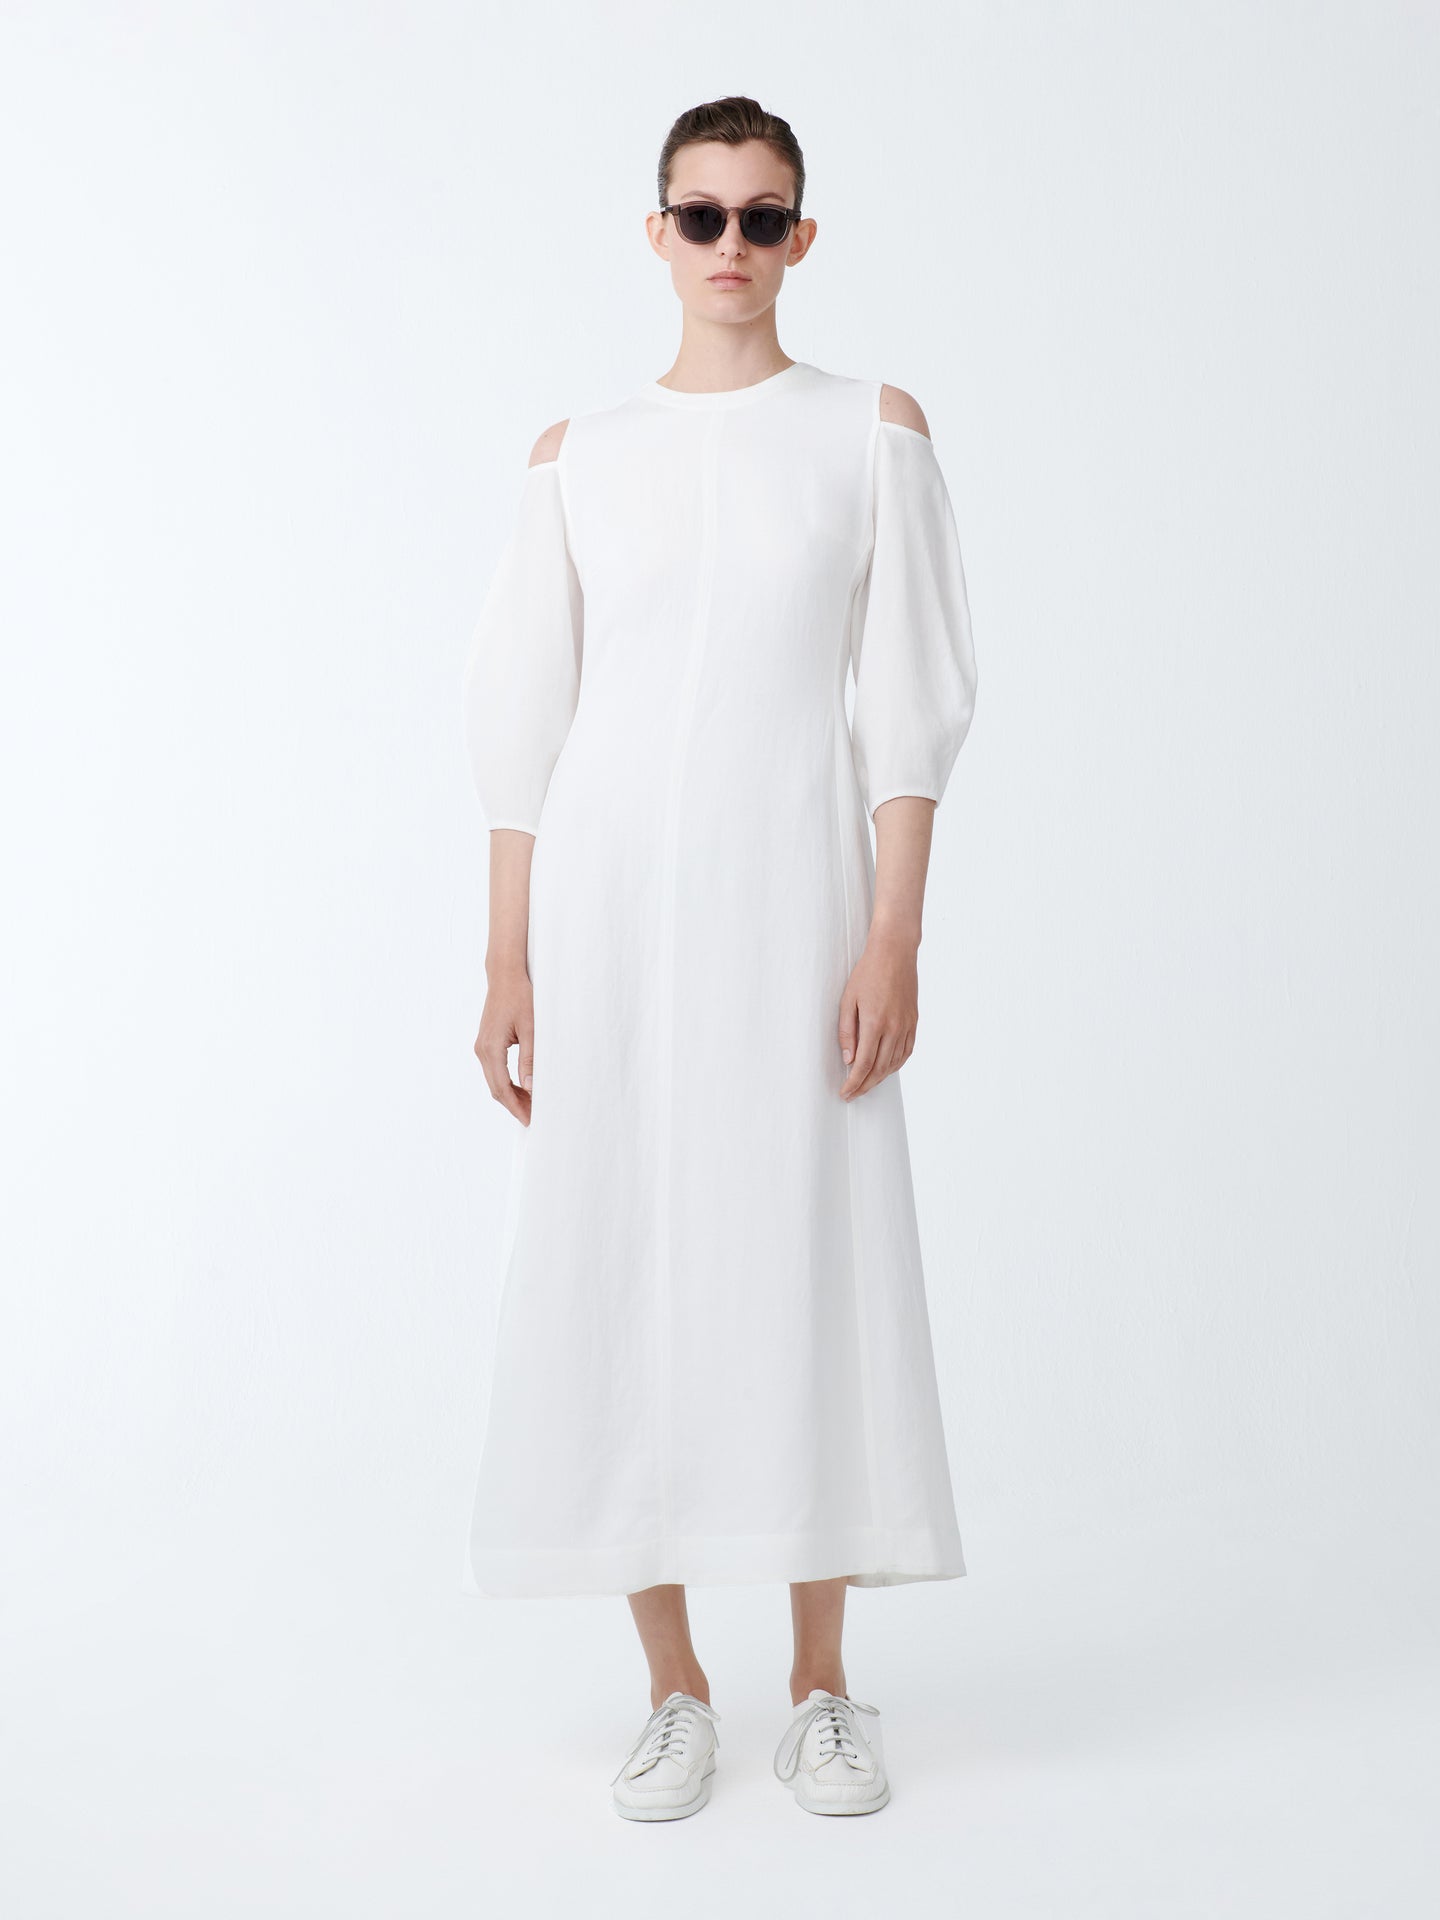 Barr Twill Dress in Parchment